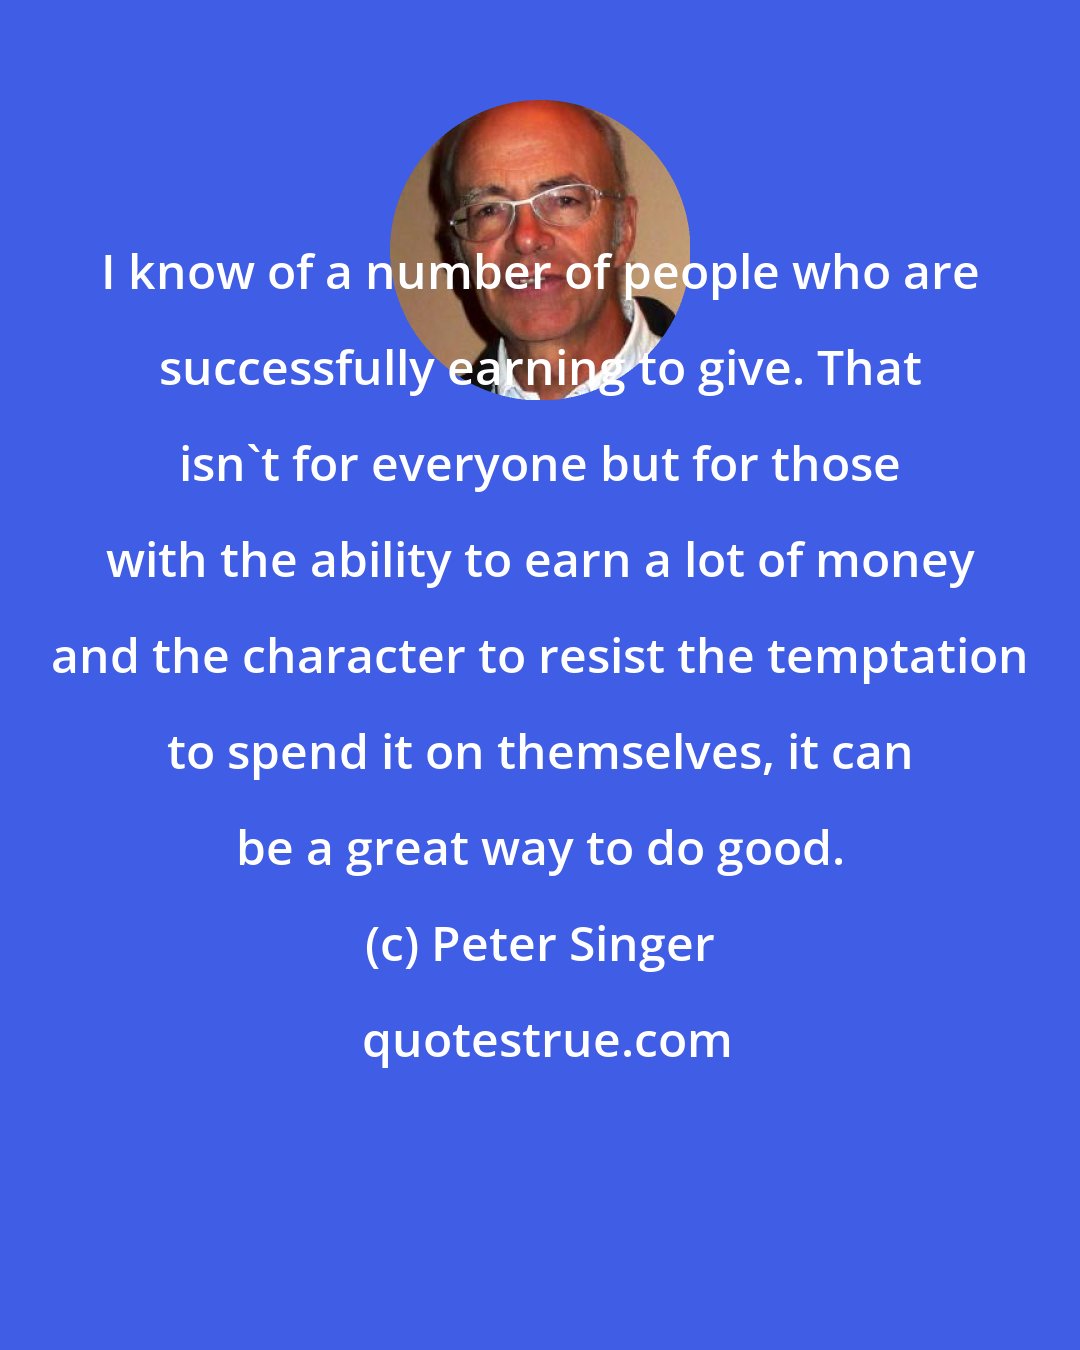 Peter Singer: I know of a number of people who are successfully earning to give. That isn't for everyone but for those with the ability to earn a lot of money and the character to resist the temptation to spend it on themselves, it can be a great way to do good.